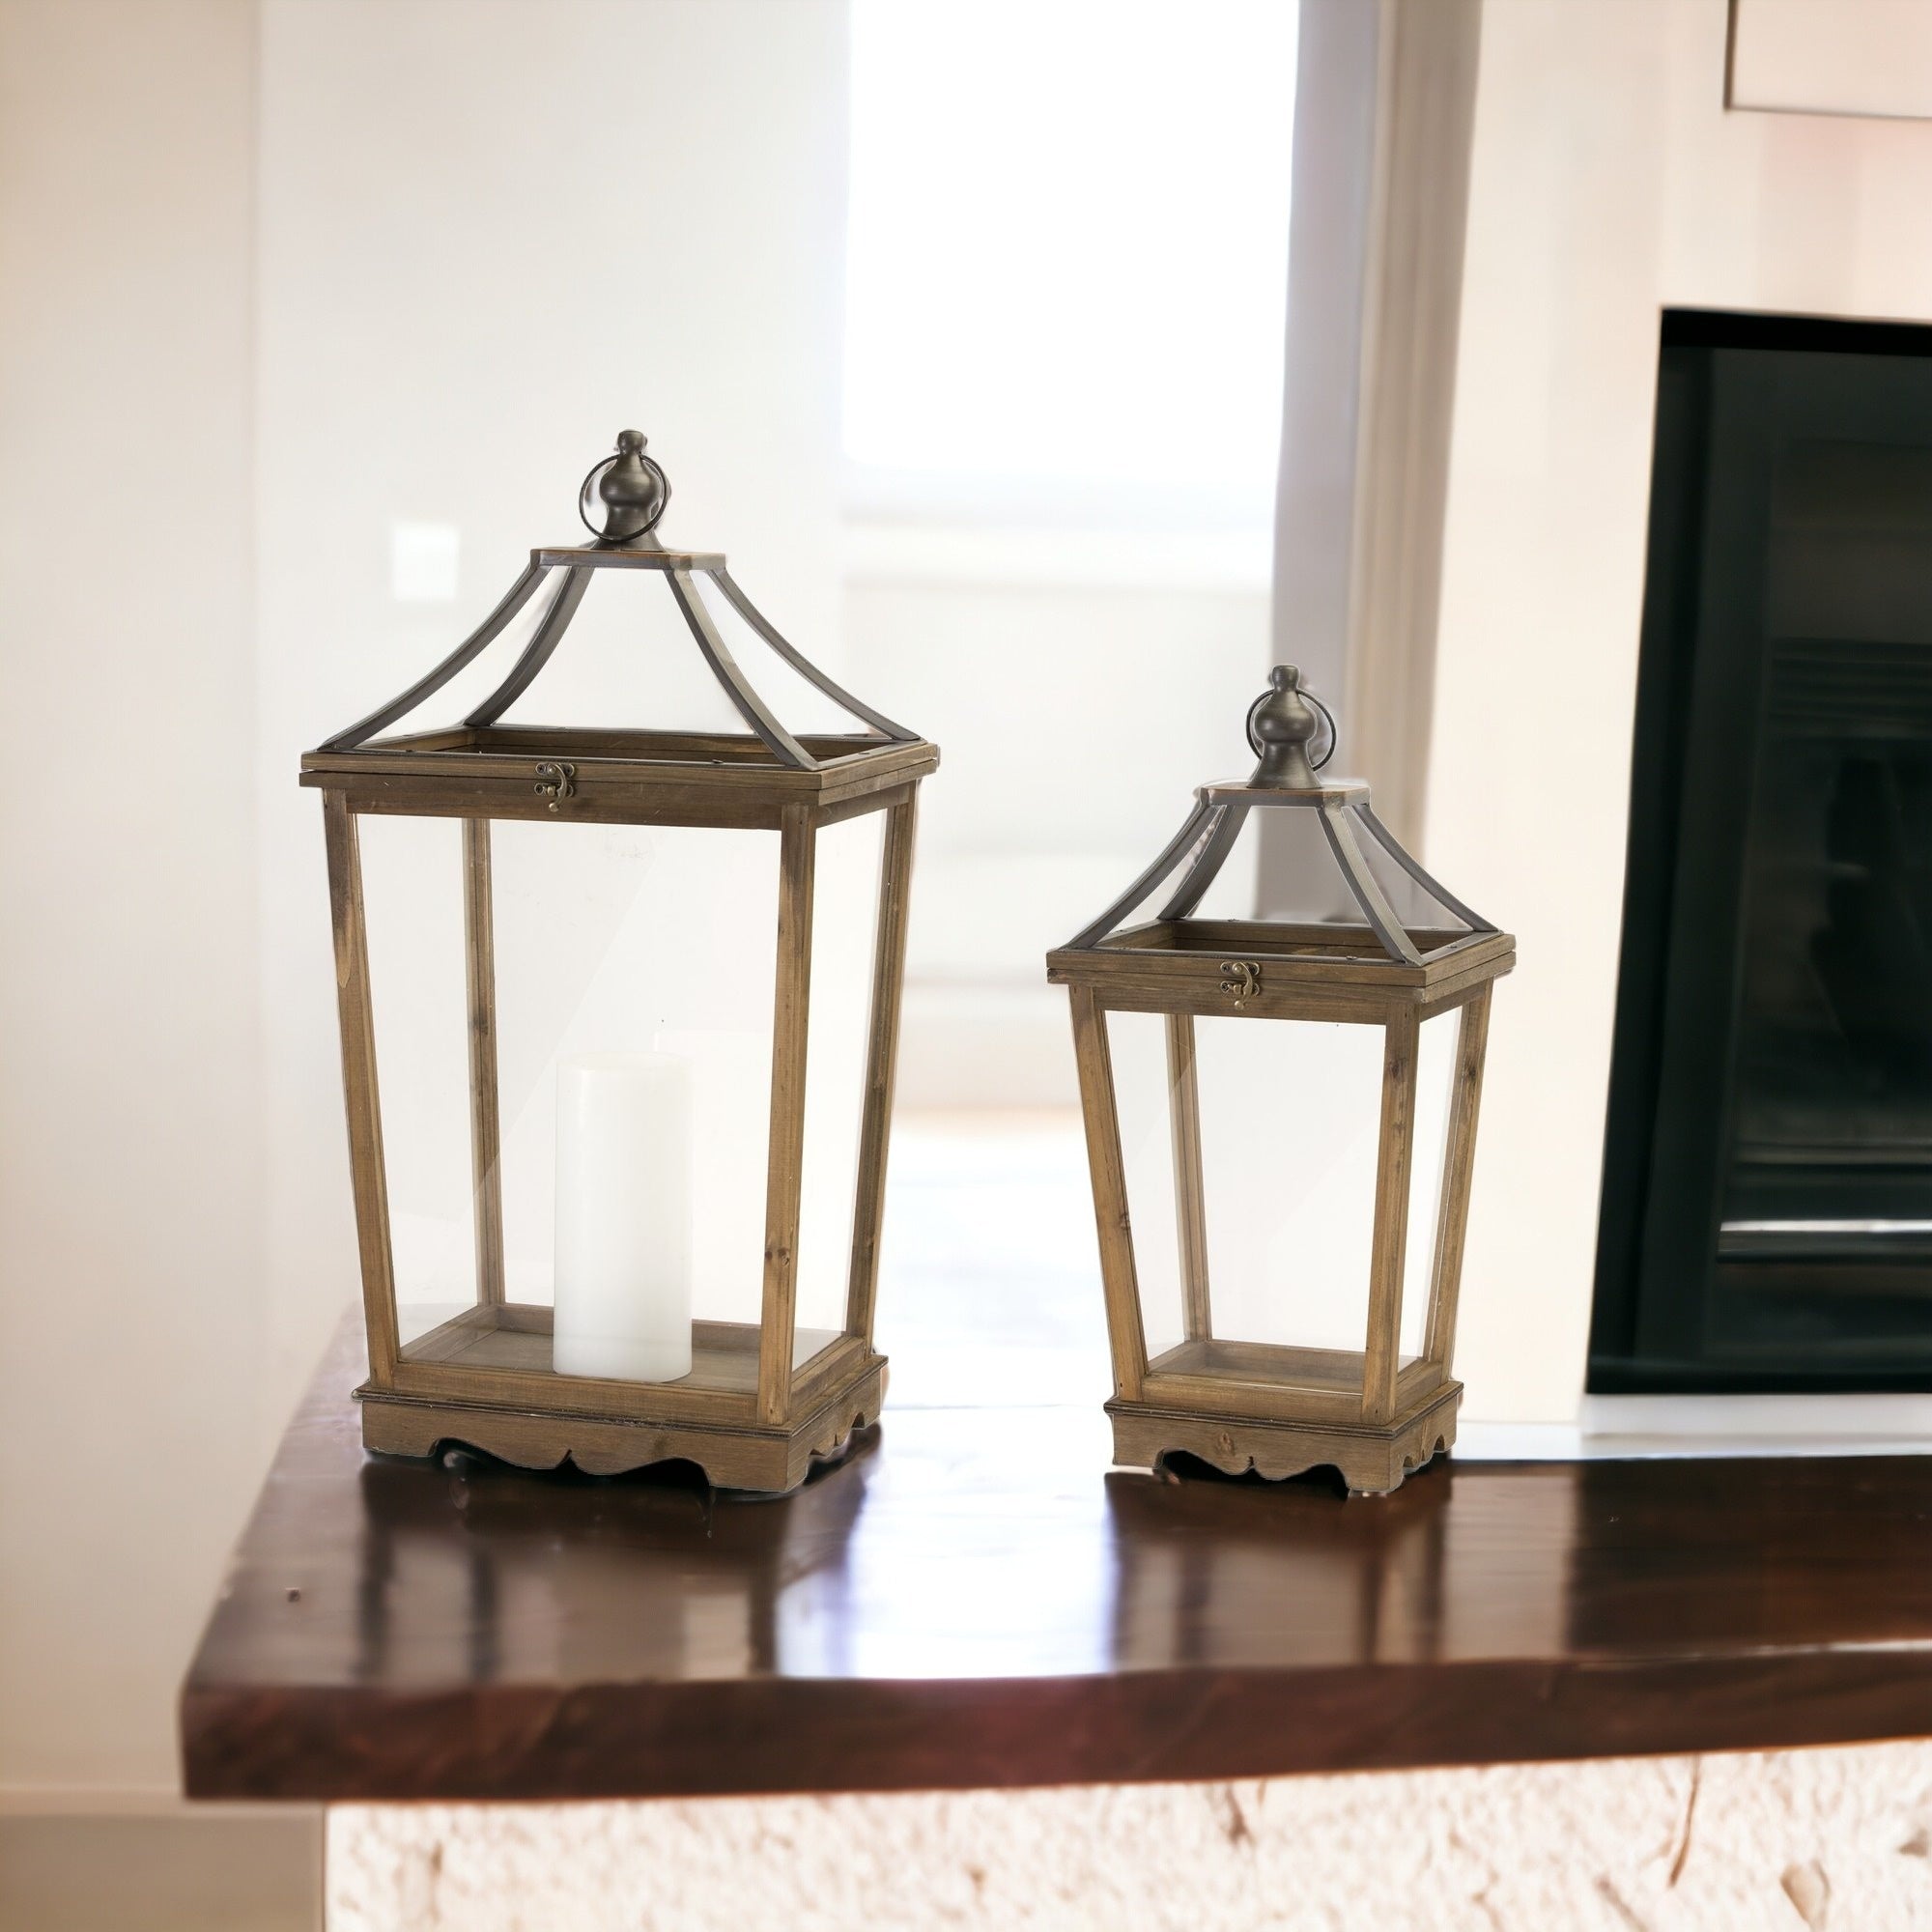 Set Of Two Brown Flameless Floor Lantern Candle Holder